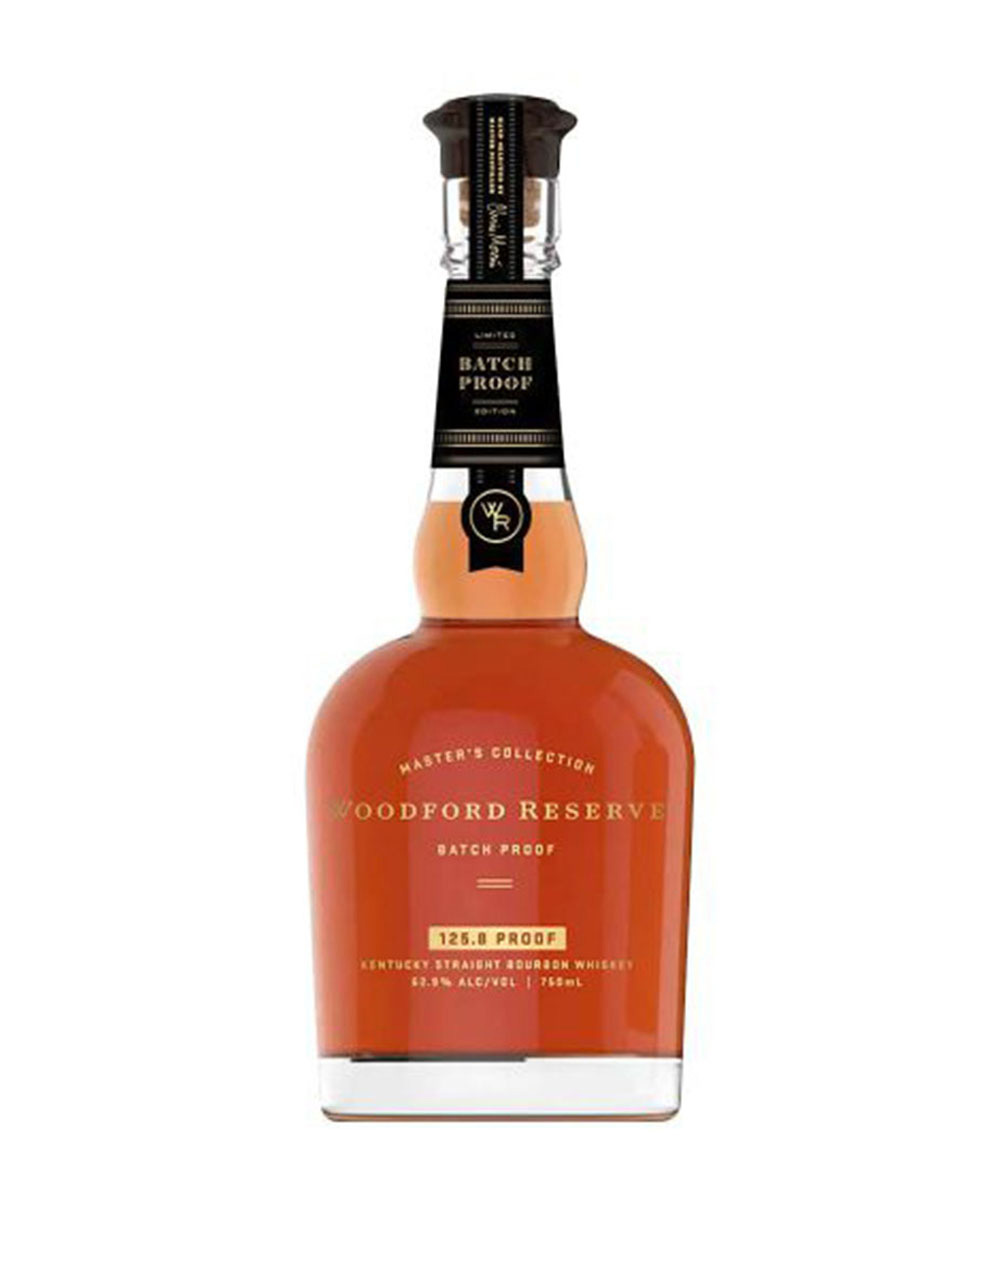 Woodford Reserve Batch Proof 2019 Release Kentucky Straight Bourbon Whiskey